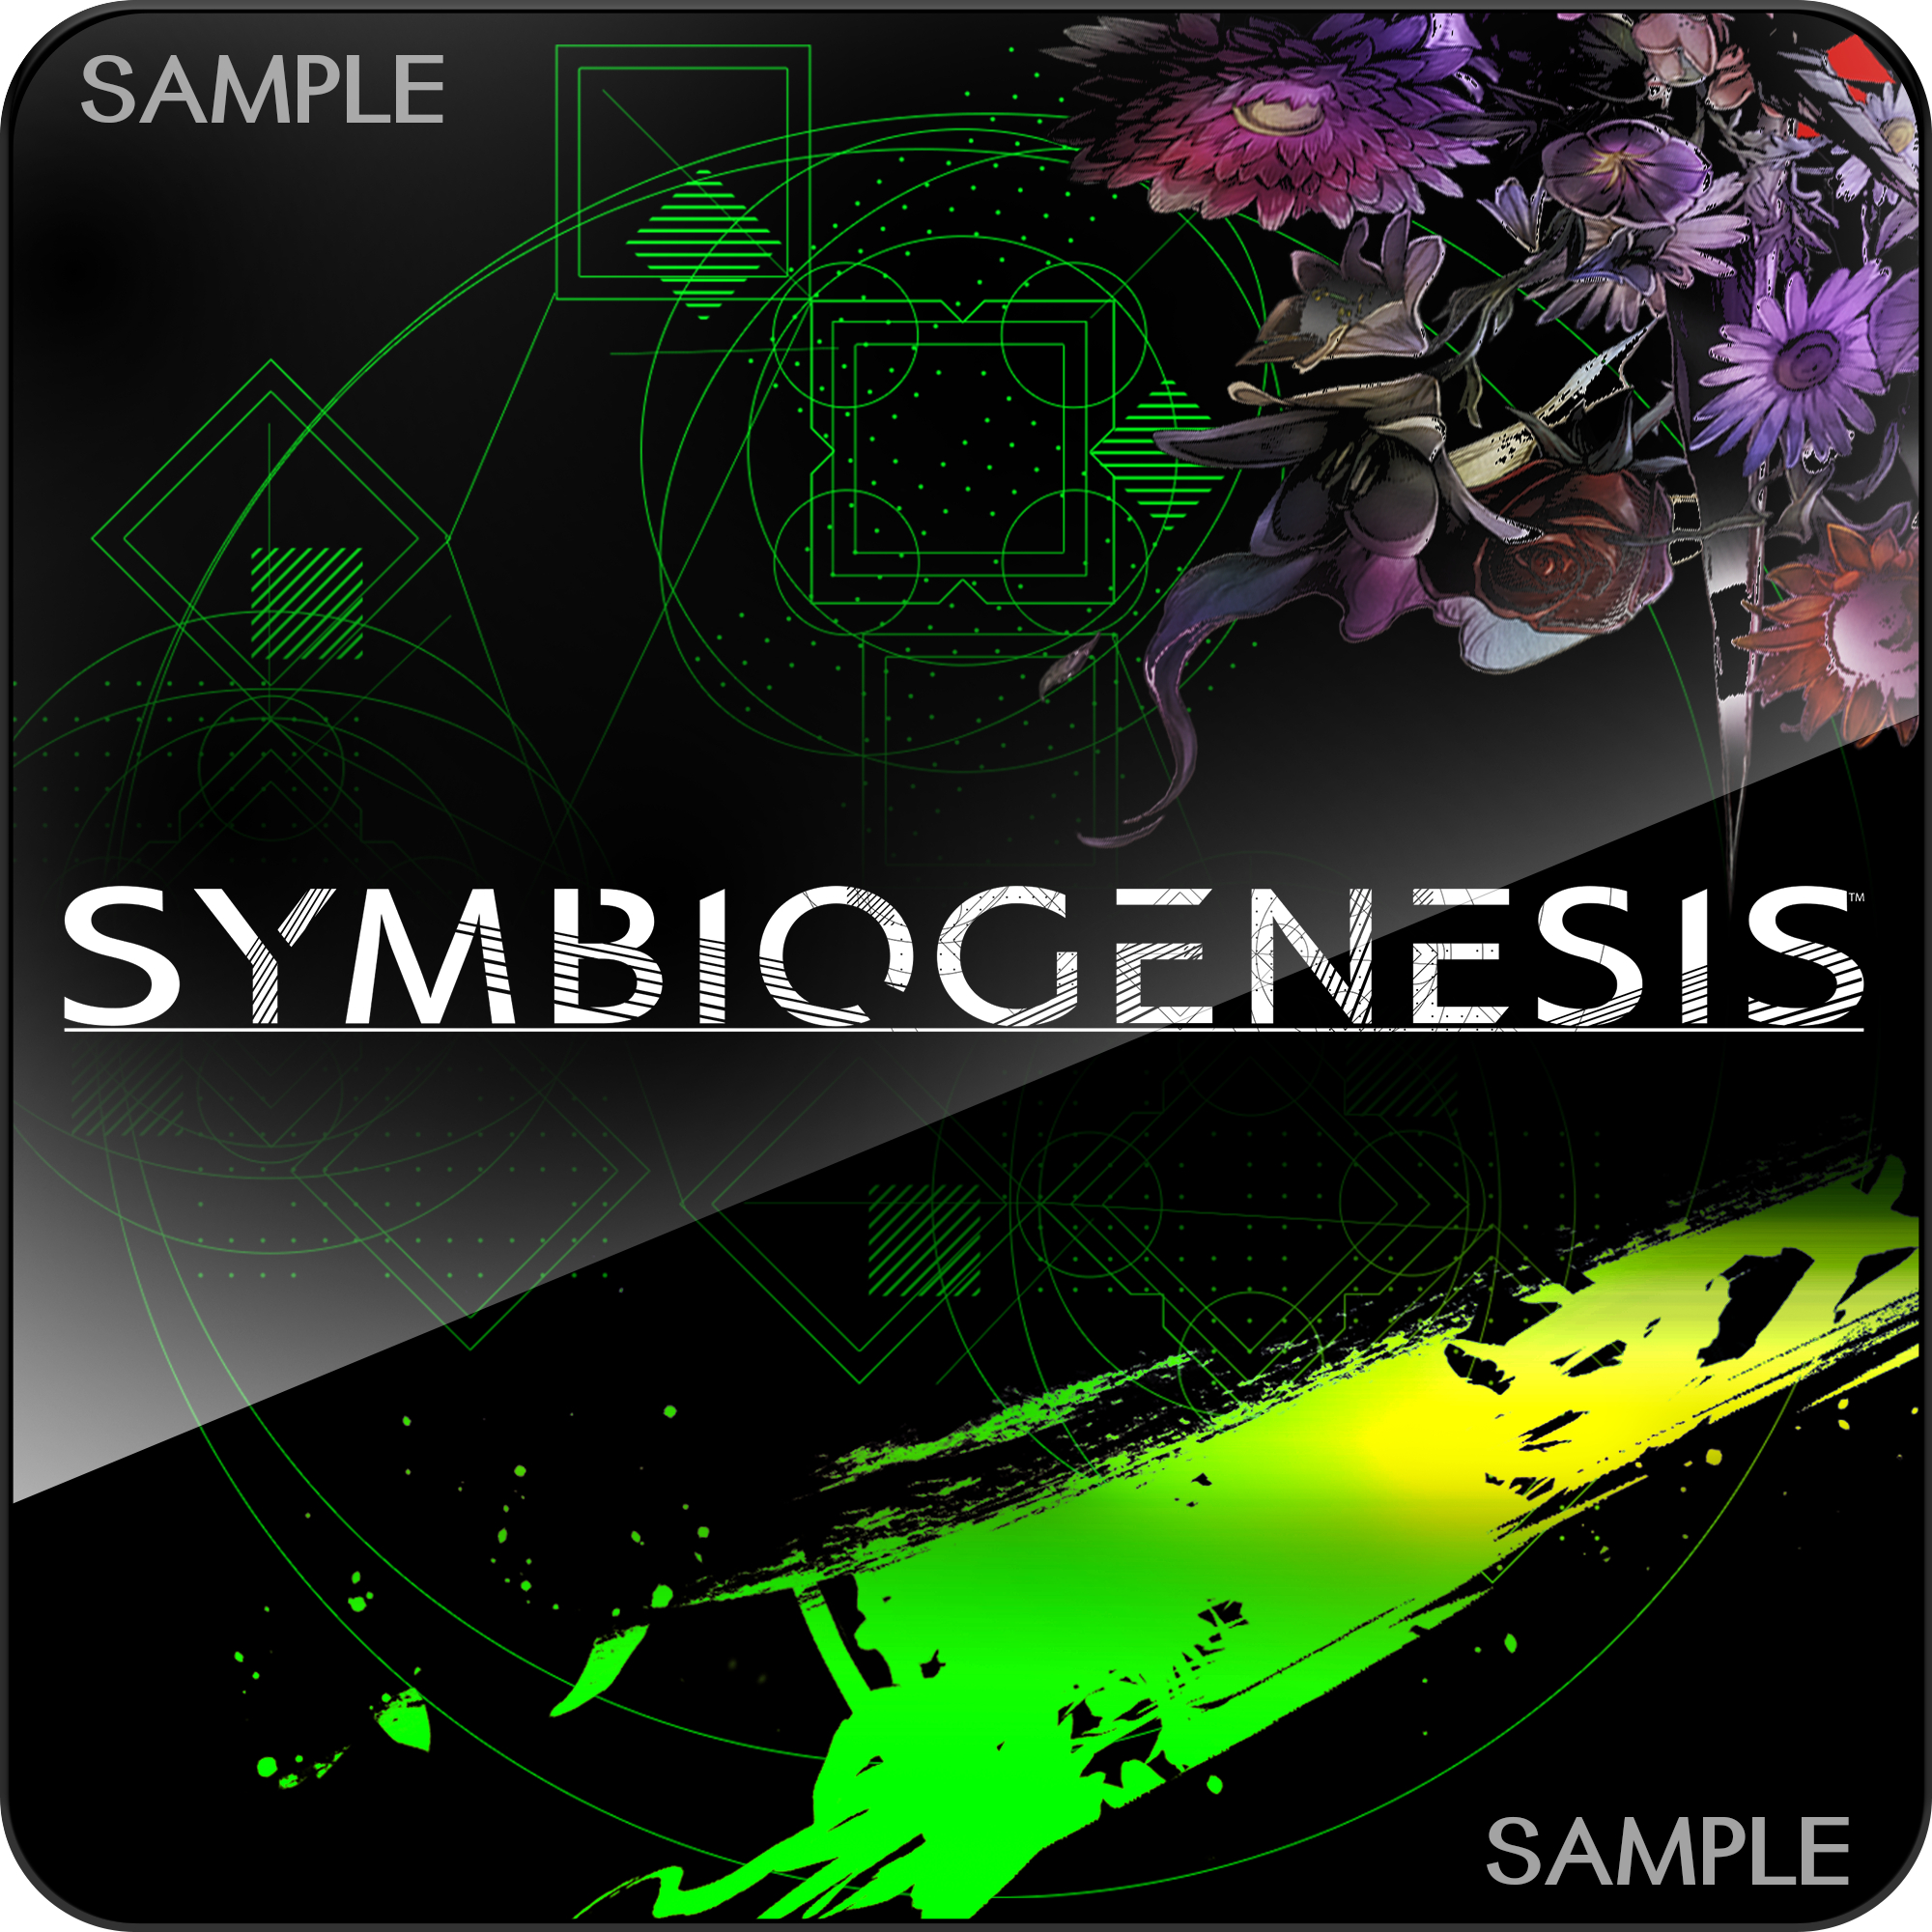 New Square Enix 'Symbiogenesis' Trademark Points to Possible